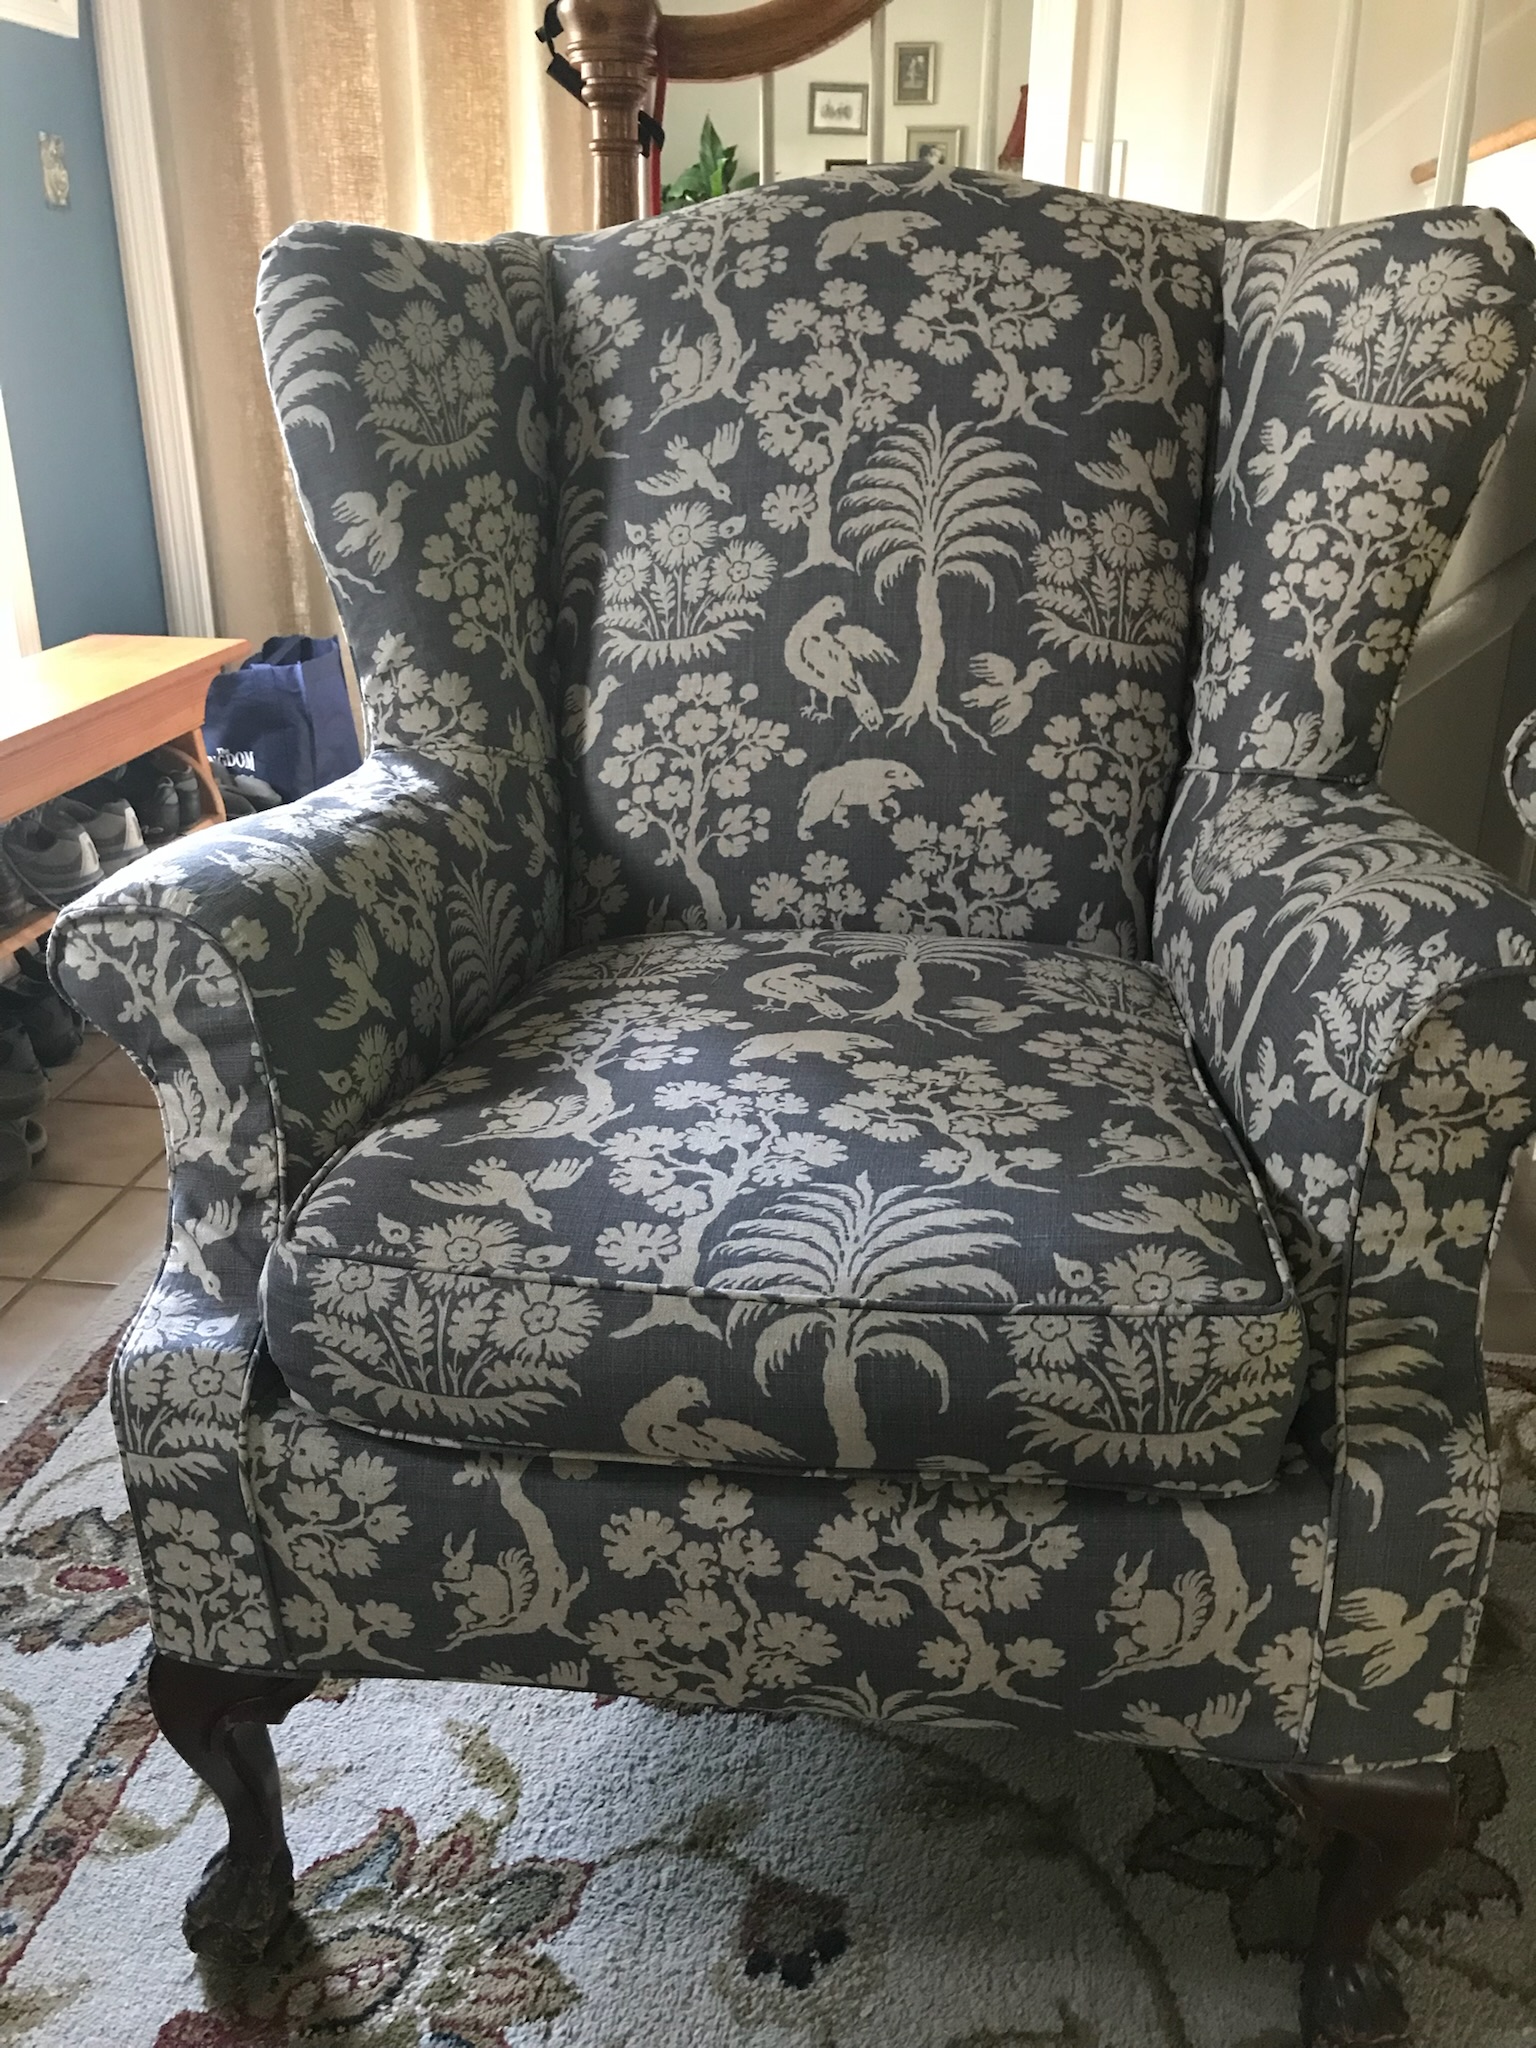 Slipcovered Tropical Chair